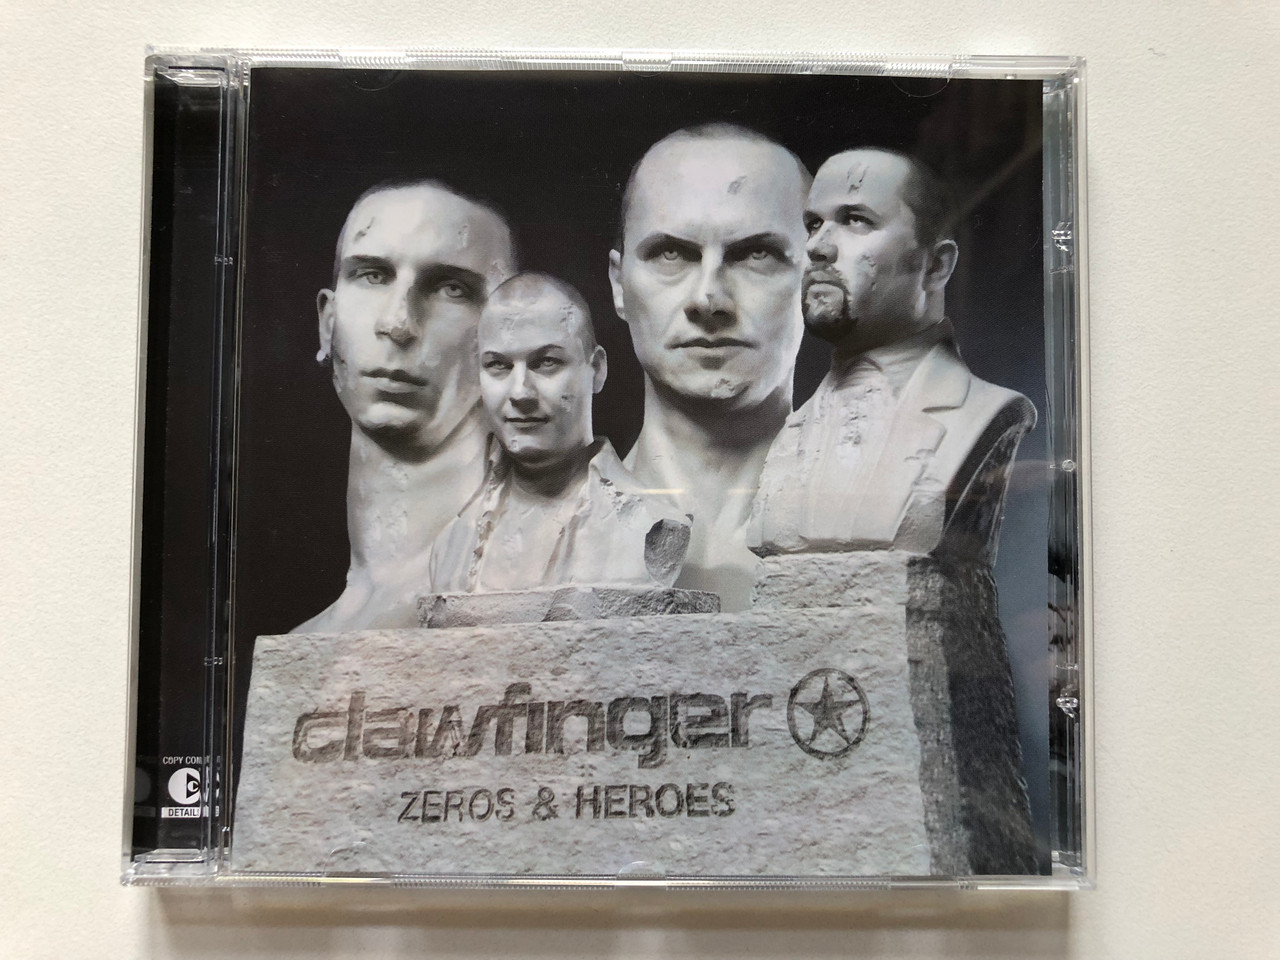 https://cdn10.bigcommerce.com/s-62bdpkt7pb/products/0/images/313379/Clawfinger_Zeros_Heroes_Supersonic_Records_Audio_CD_2003_SUPERSONIC_132_1__71166.1700750160.1280.1280.JPG?c=2